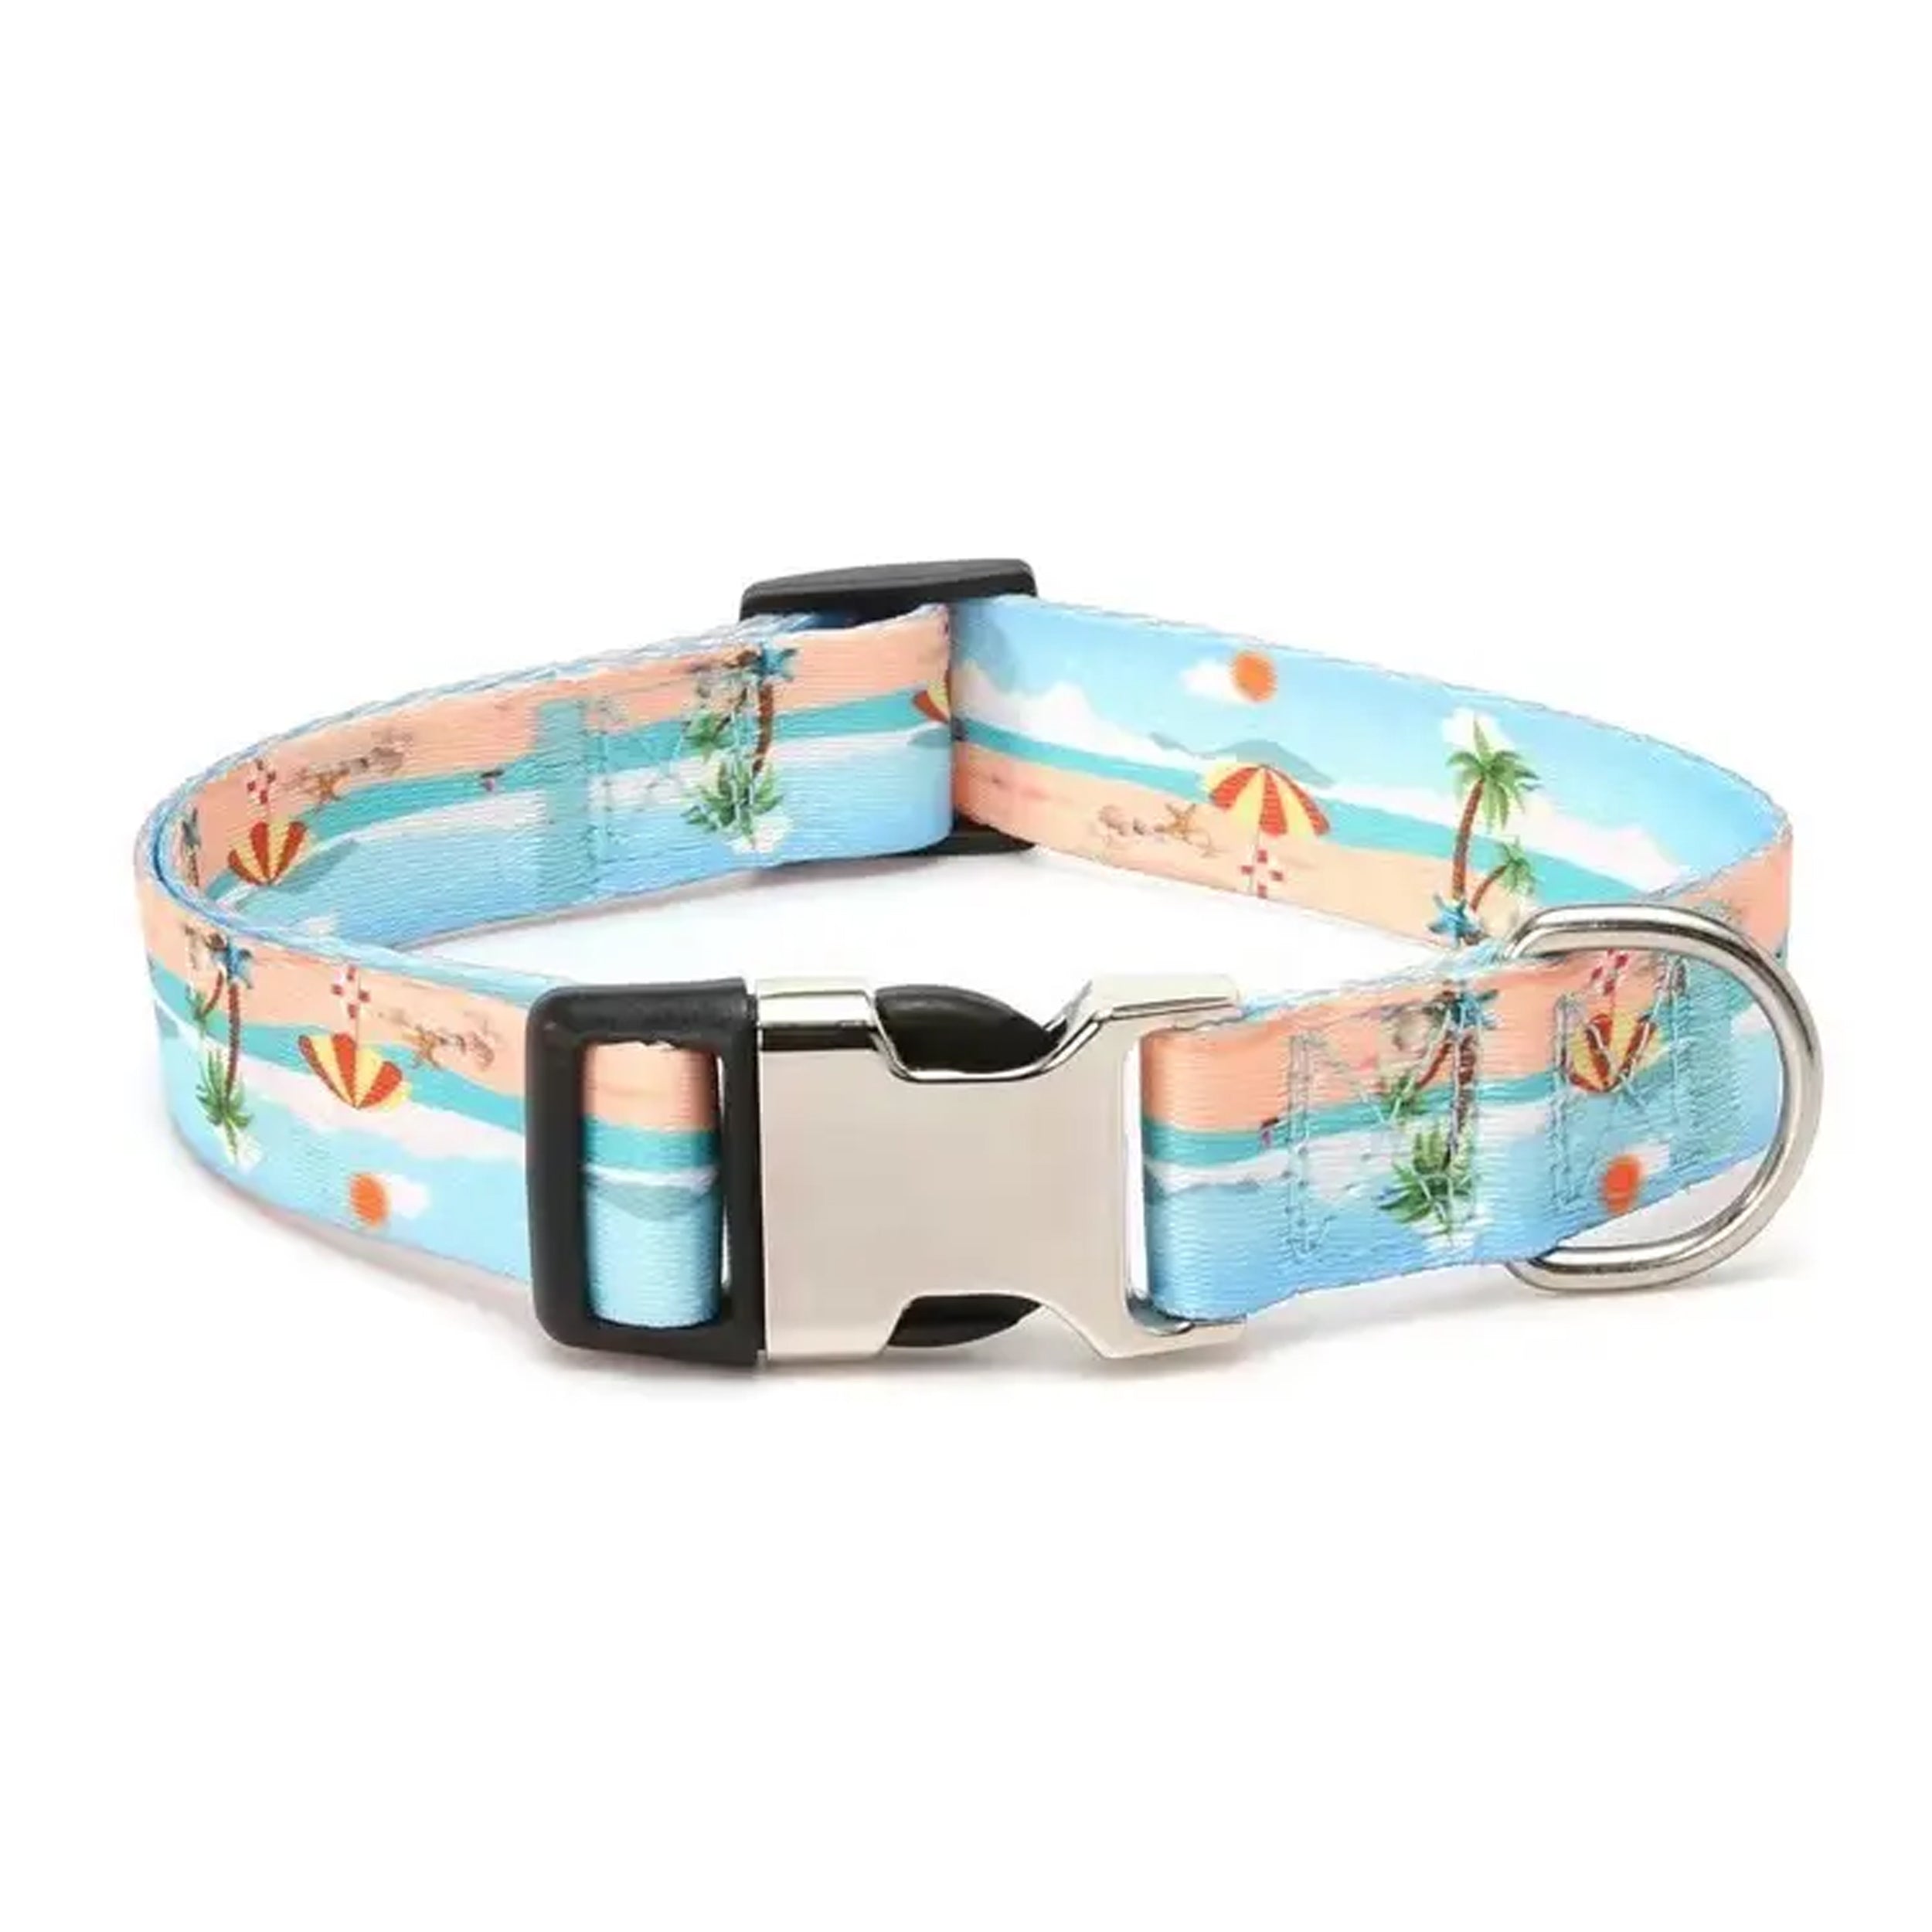 Soft Dog Collar with Metal Buckle for Comfort and Durability